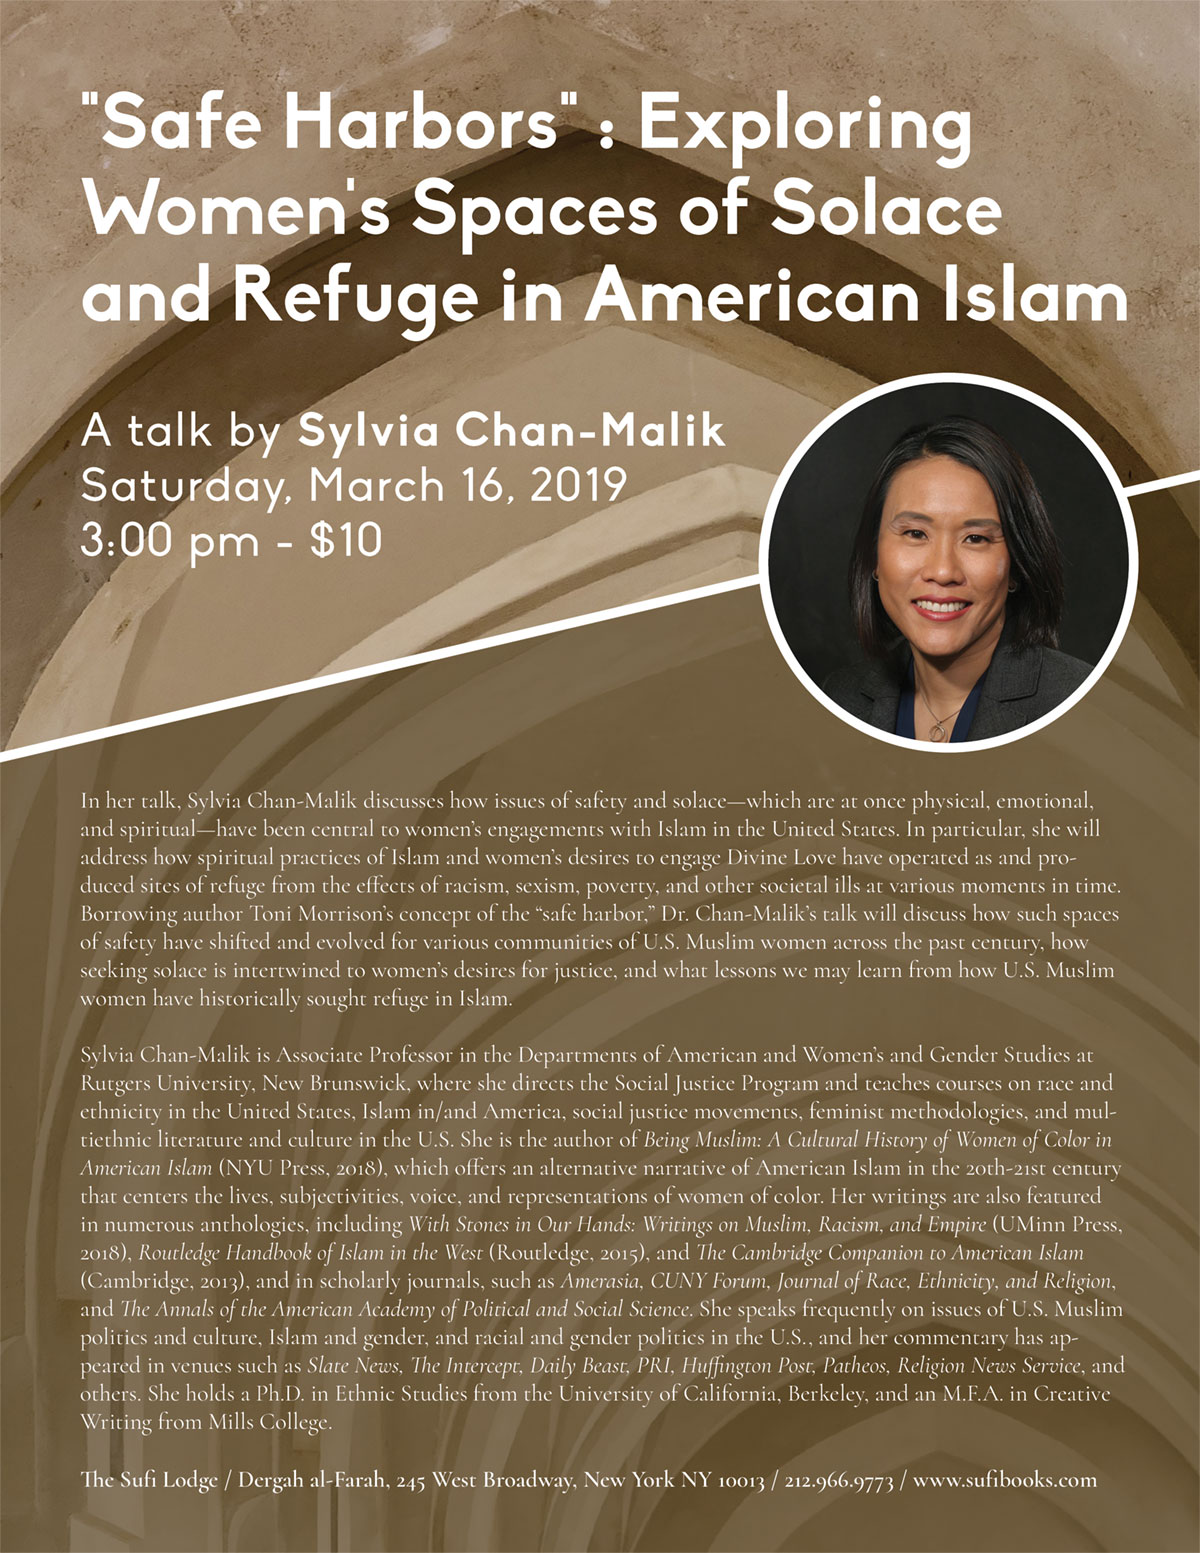 Saturday, March 16, 2019 | “Safe Harbors” : Exploring Women’s Spaces of Solace and Refuge in American Islam | A talk by Sylvia Chan-Malik | 3 pm | $10